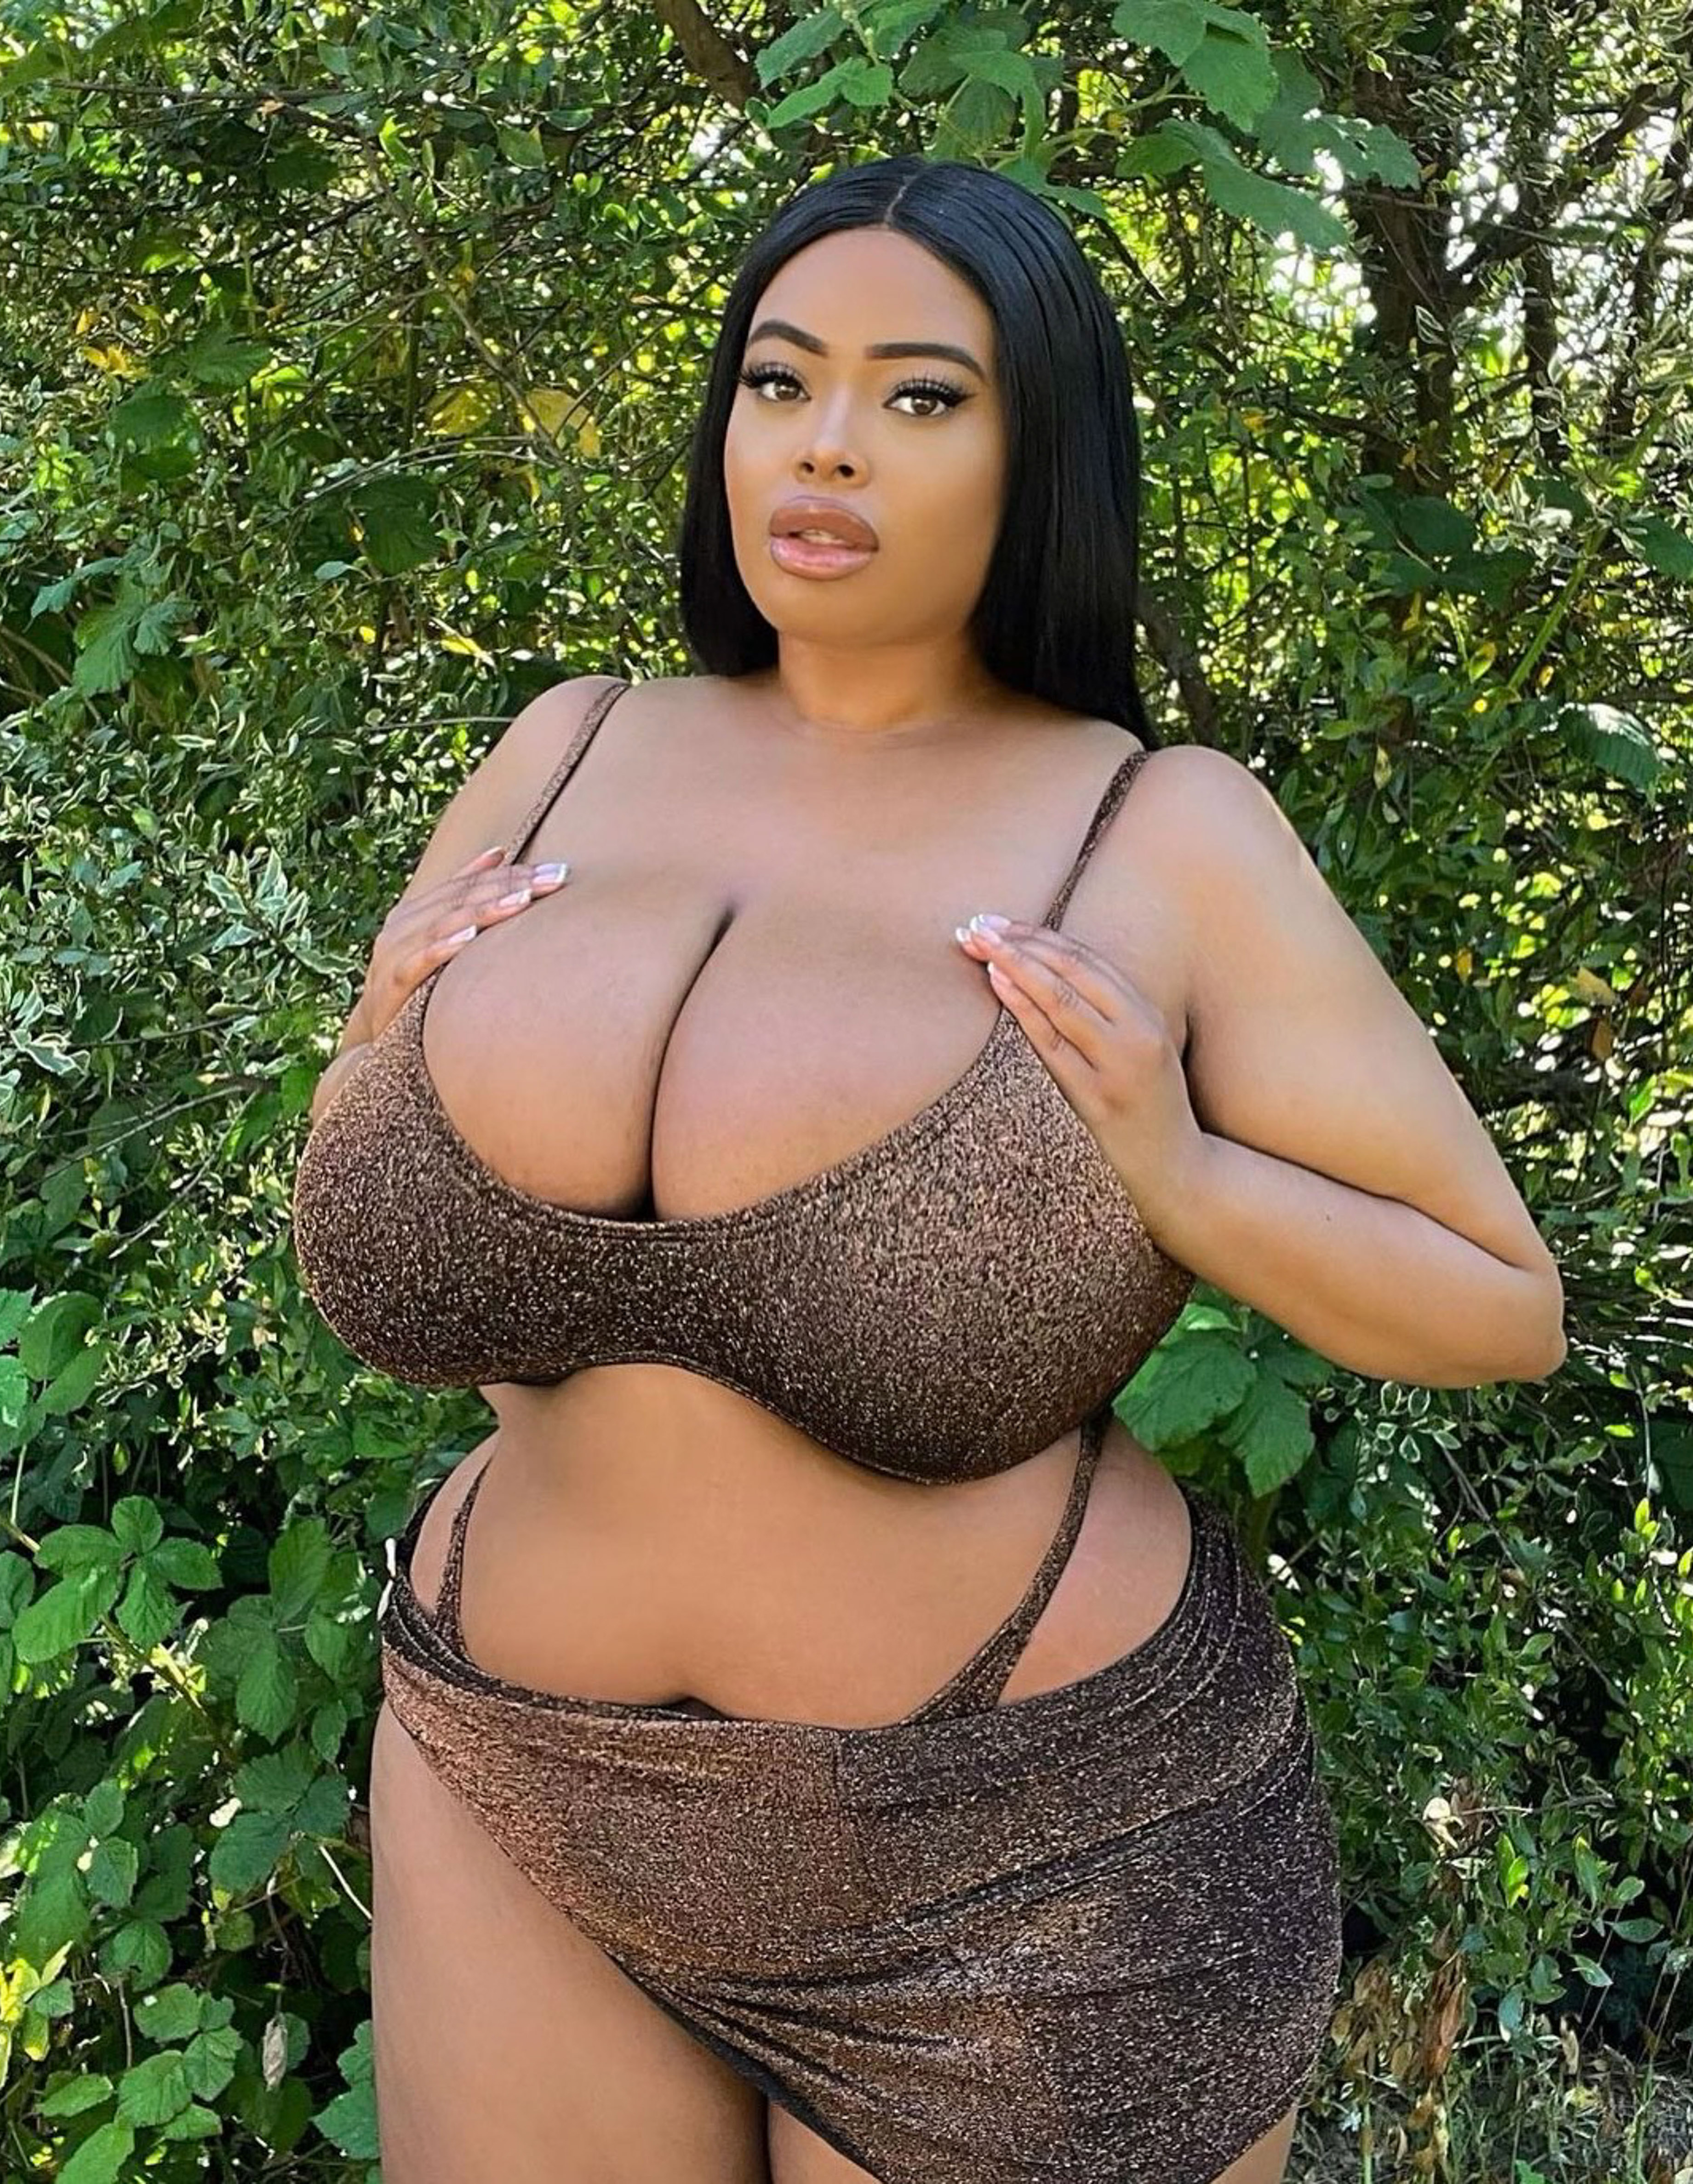 cherie saunders share g size tits photos